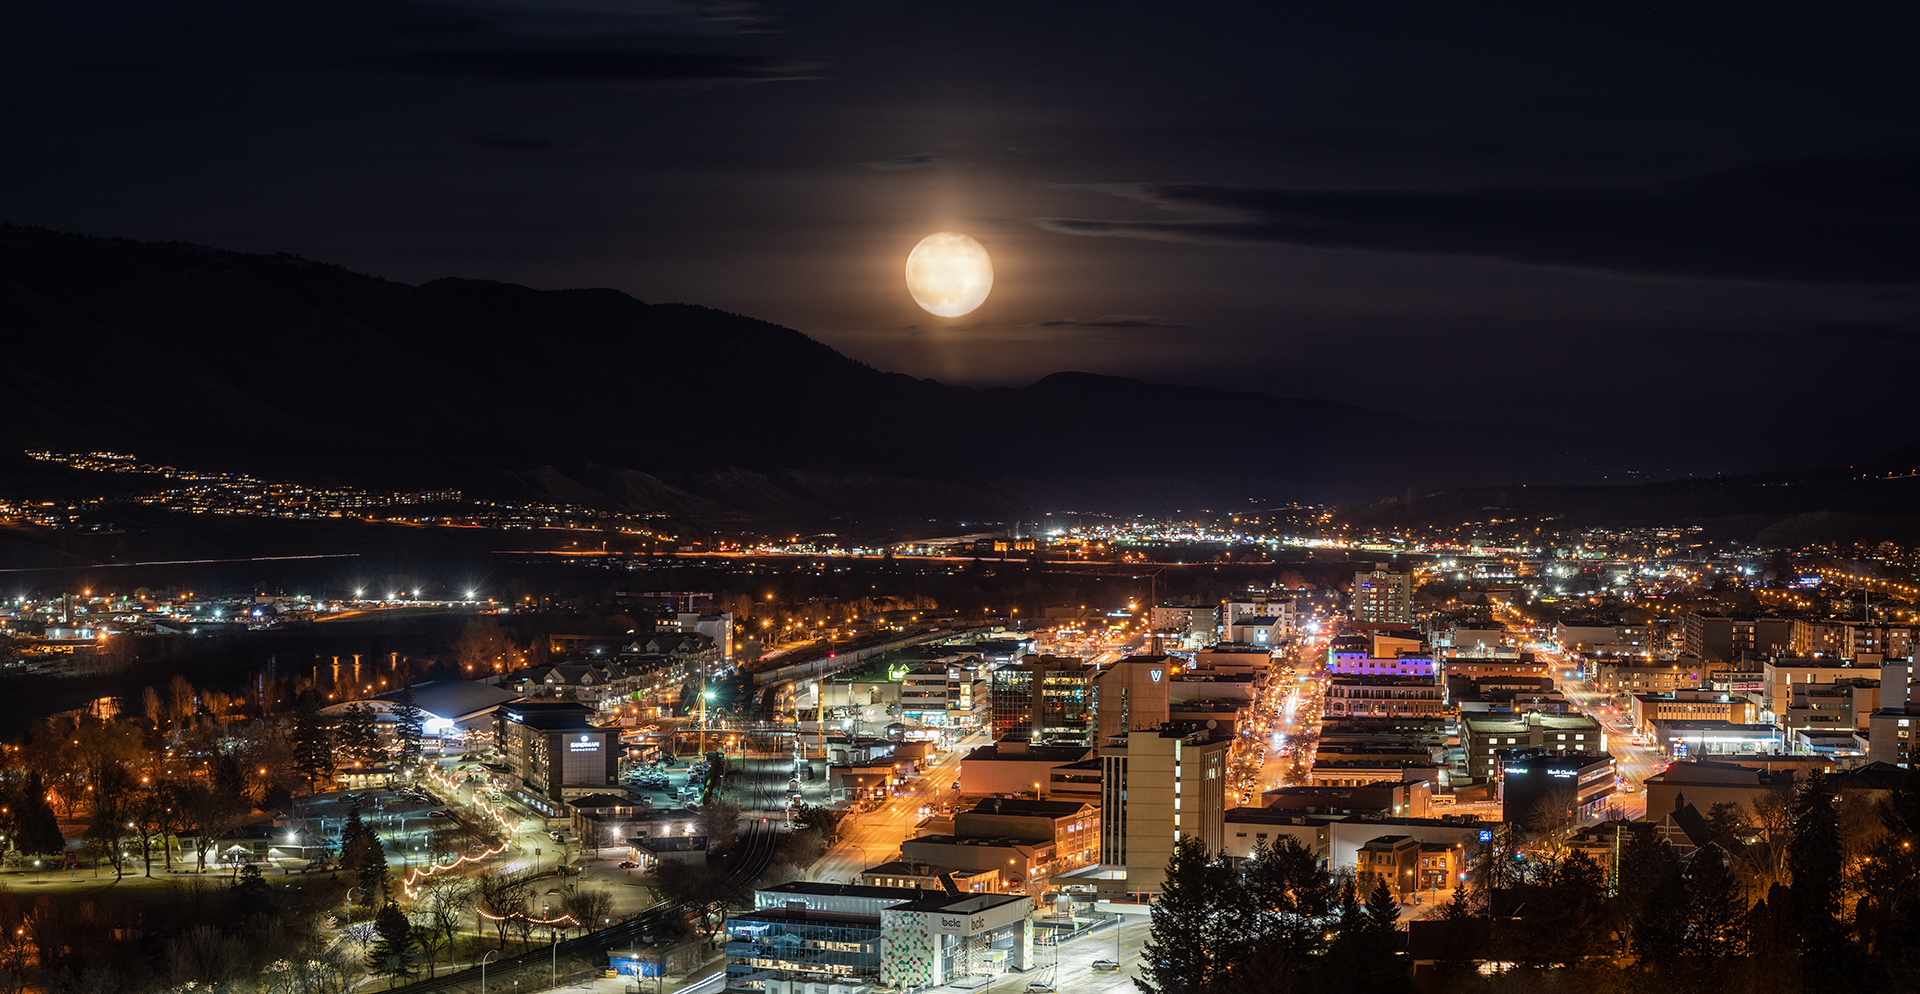 Kamloops City full moon with city and bright lights